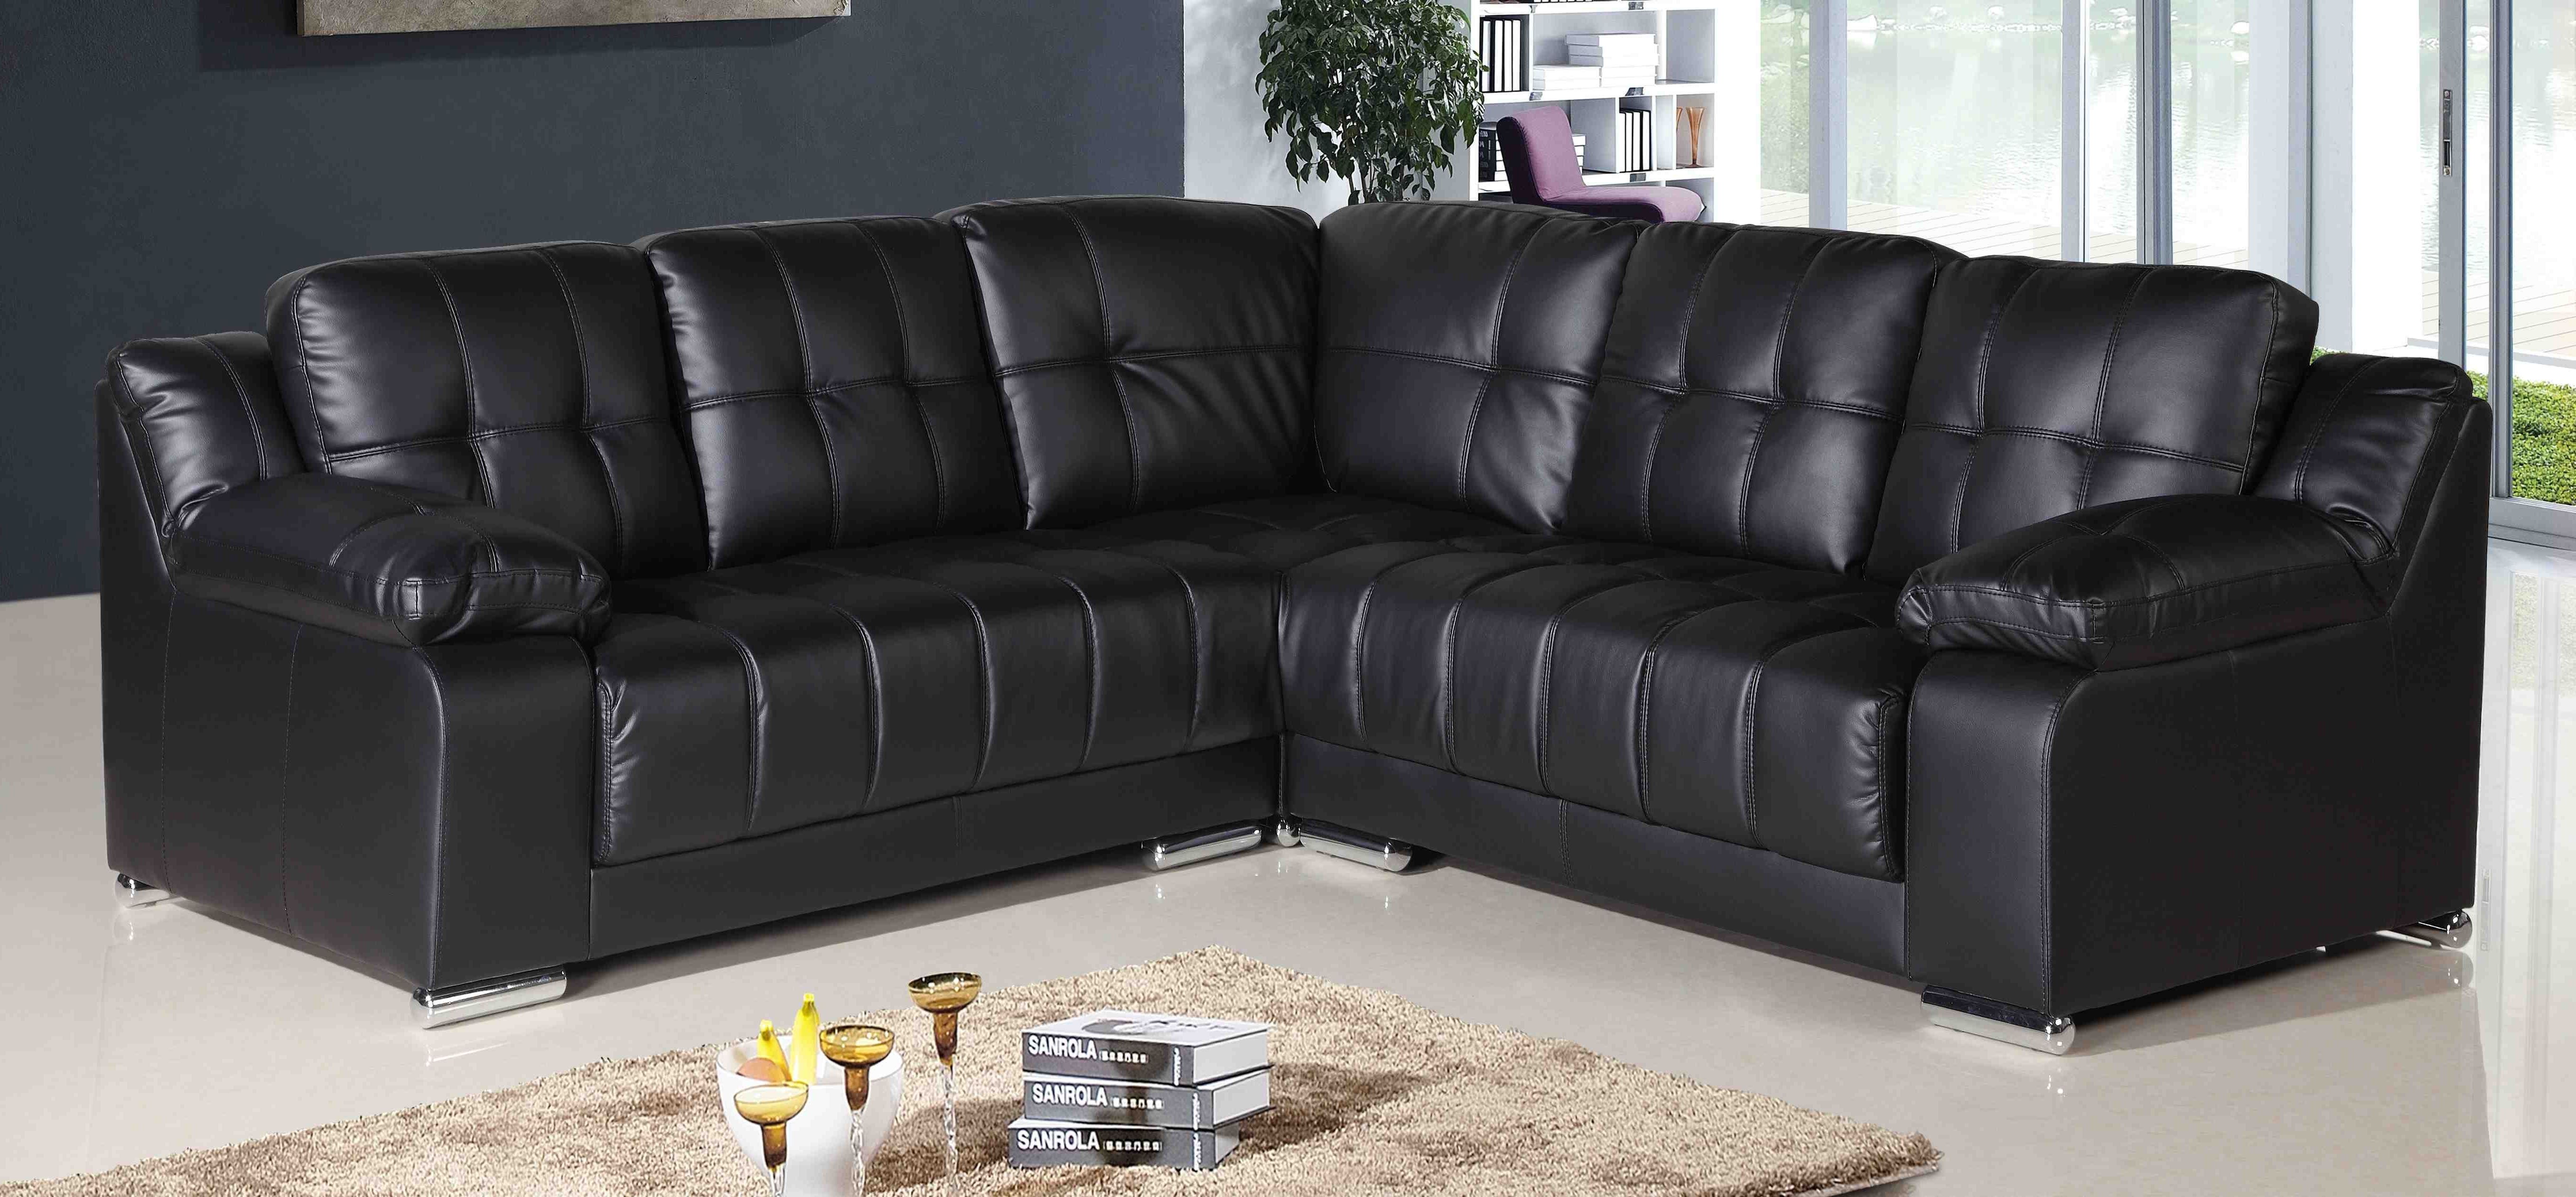 Small Leather Corner Sofas 52 With Small Leather Corner Sofas Throughout Fashionable Leather Corner Sofas (Photo 3 of 20)